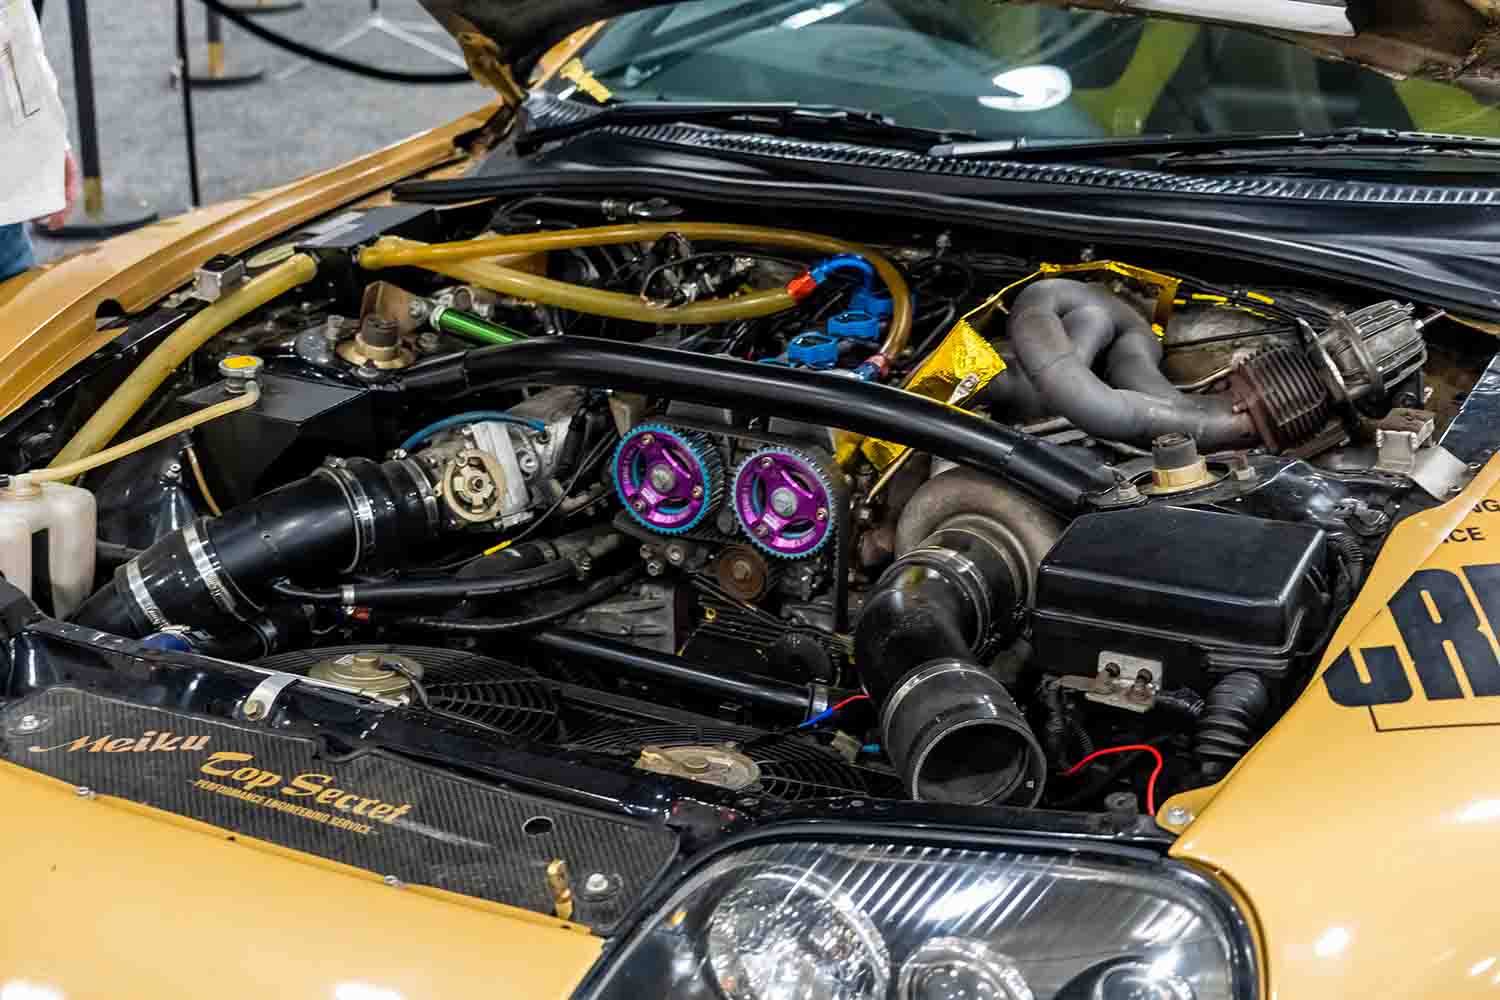 four-cylinder Toyota Supra with 700 horsepower 3S-GTE engine